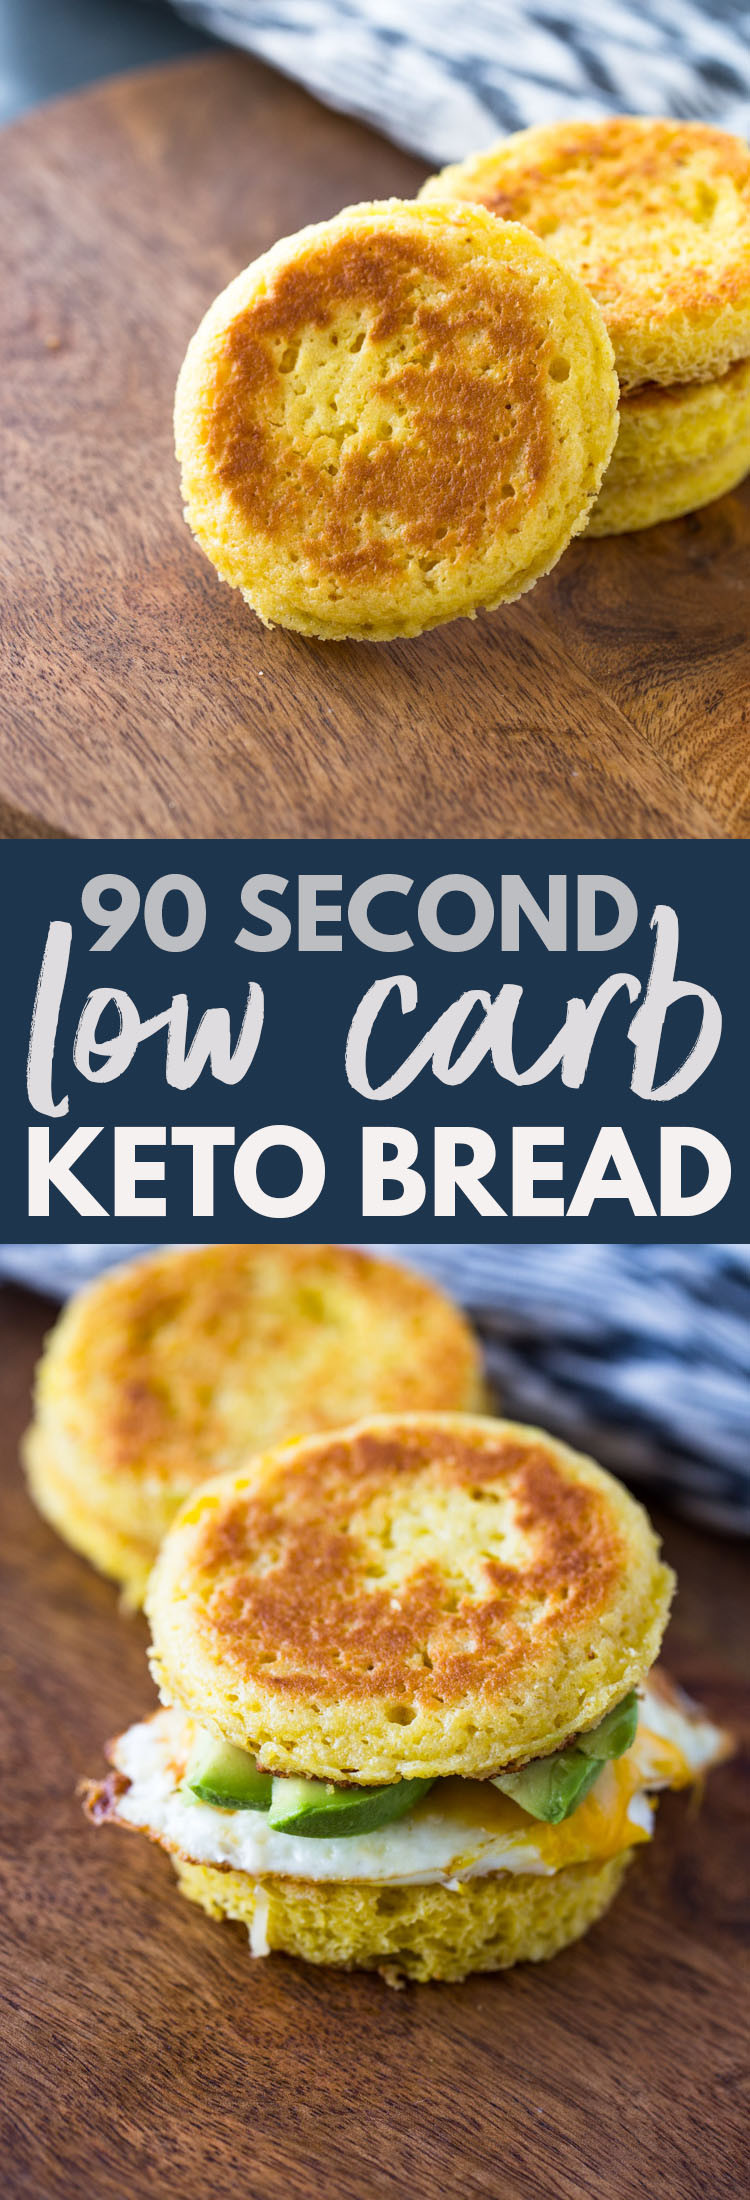 90 Second Keto Bread In Oven
 90 Second Microwavable Low Carb Keto Bread